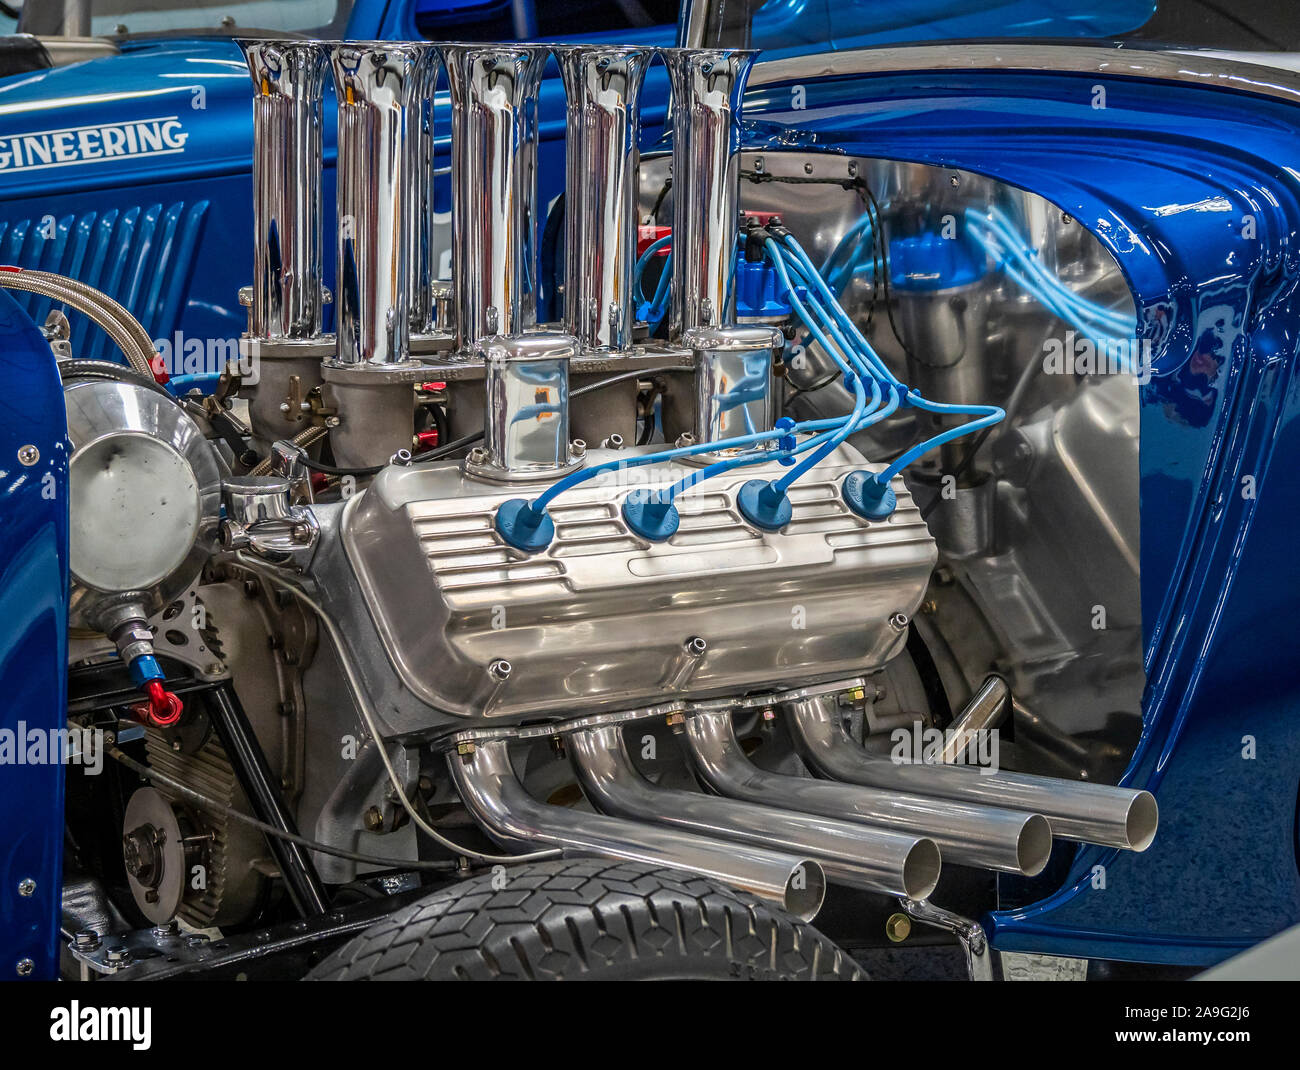 Chrome covered powerful hot rod car engines Stock Photo